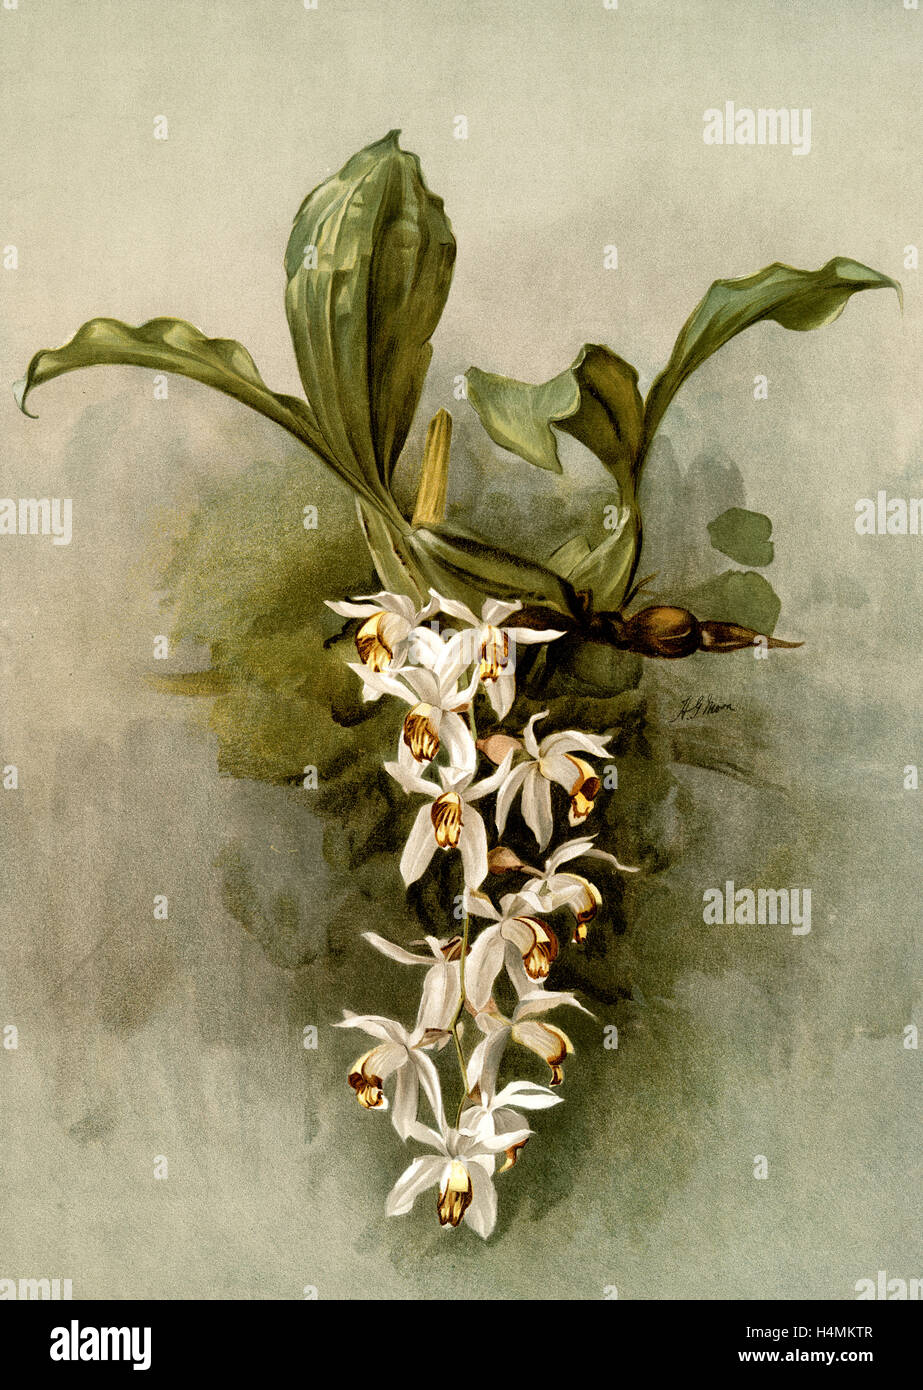 Coelogyne swaniana, Sander, F. (Frédéric), 1847-1920, Mansell, Joseph, lithographe, lune, H. G Banque D'Images